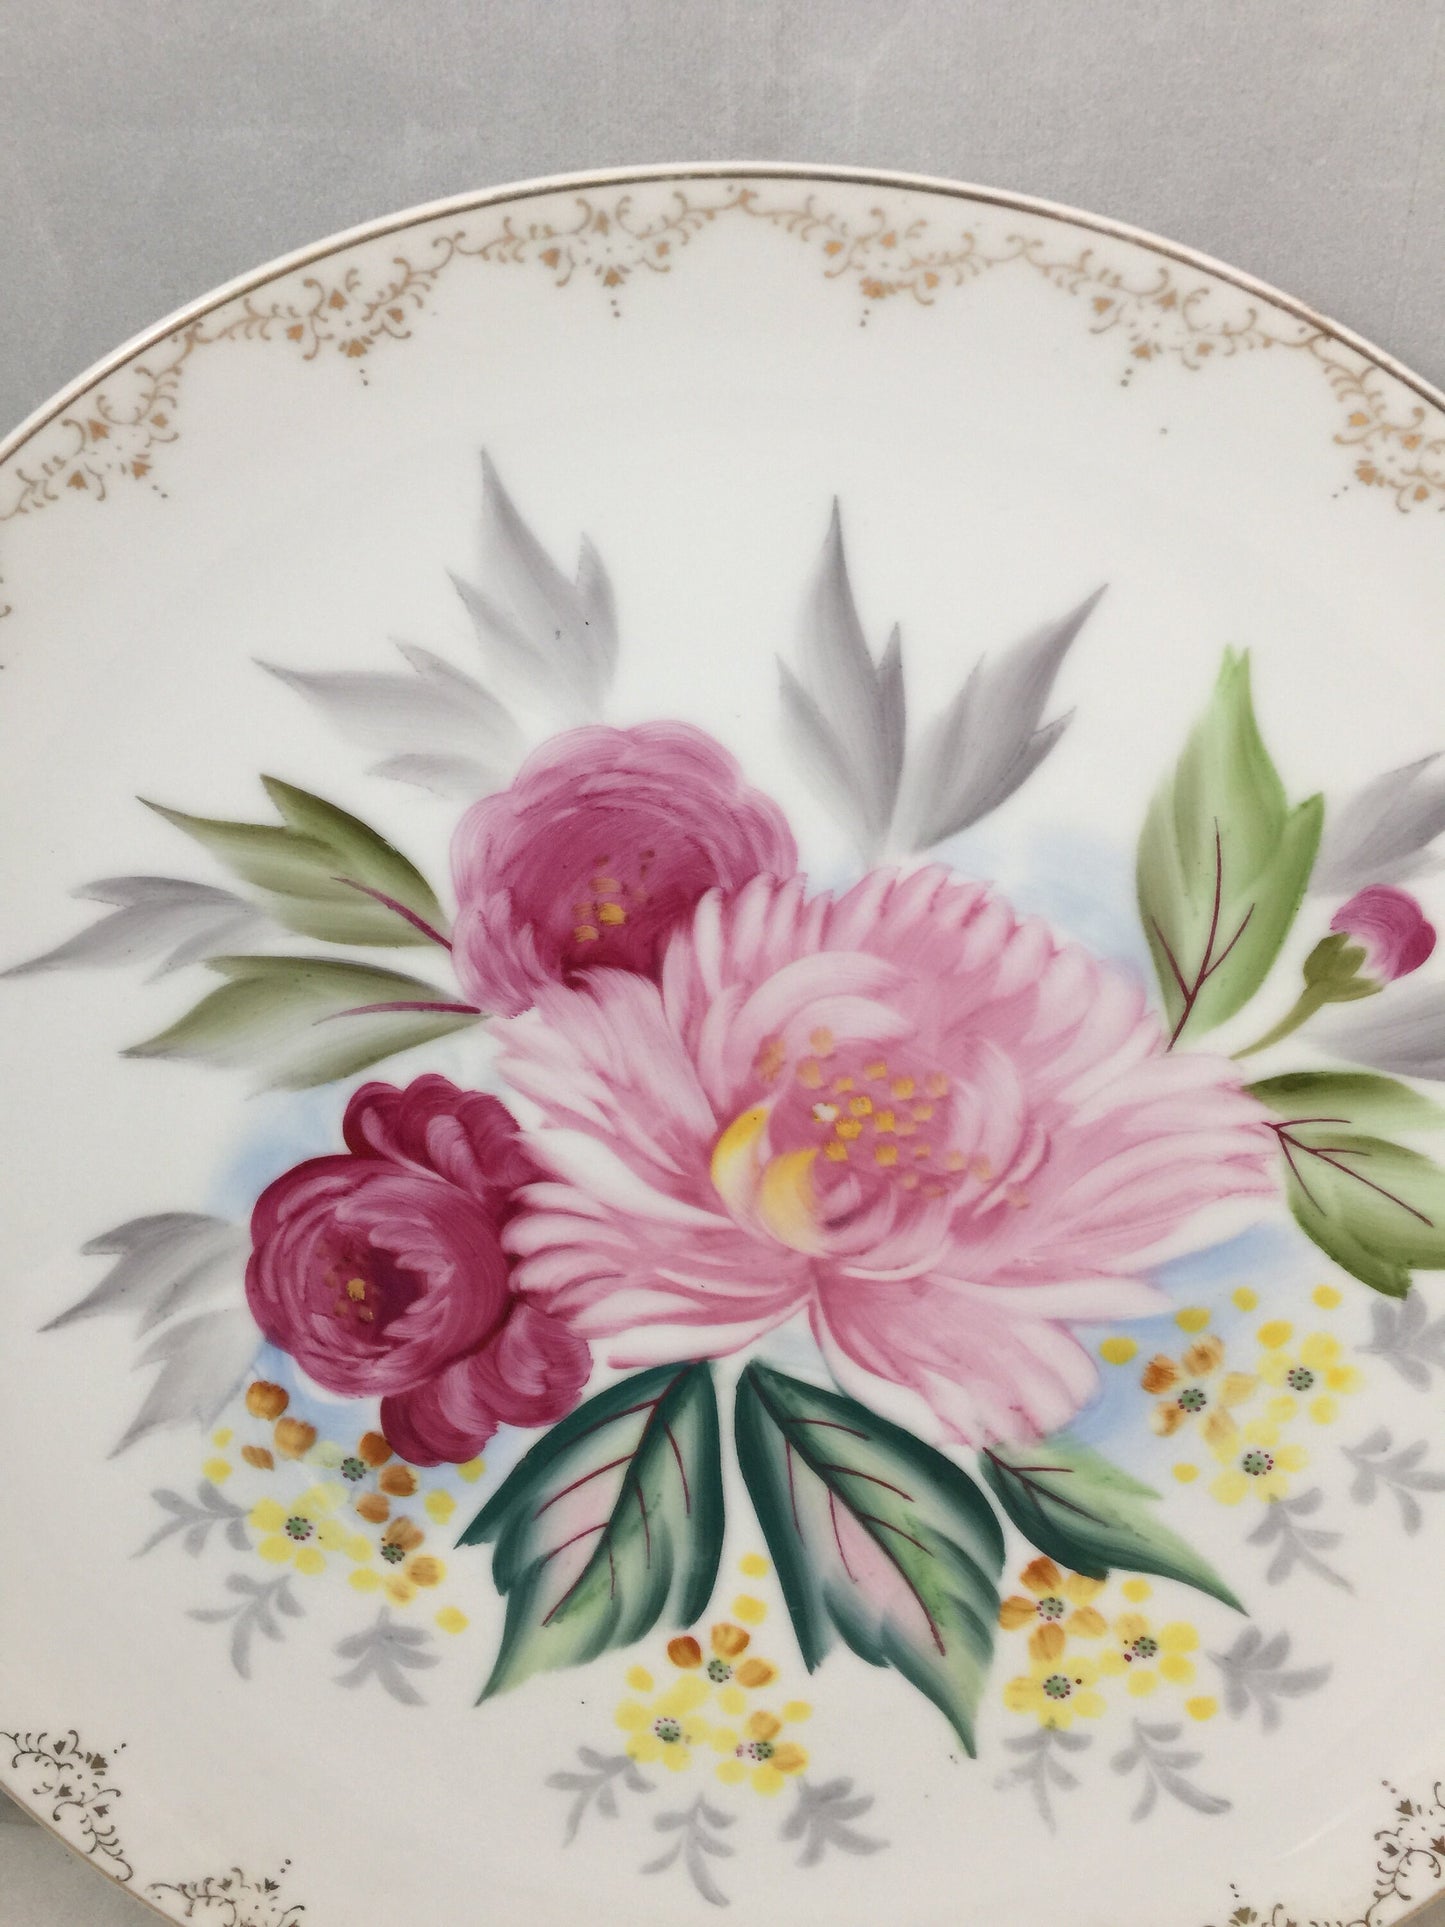 VIntage Floral Porcelain China Plate - High Quality Hand Painted Floral Pattern - Duckwells